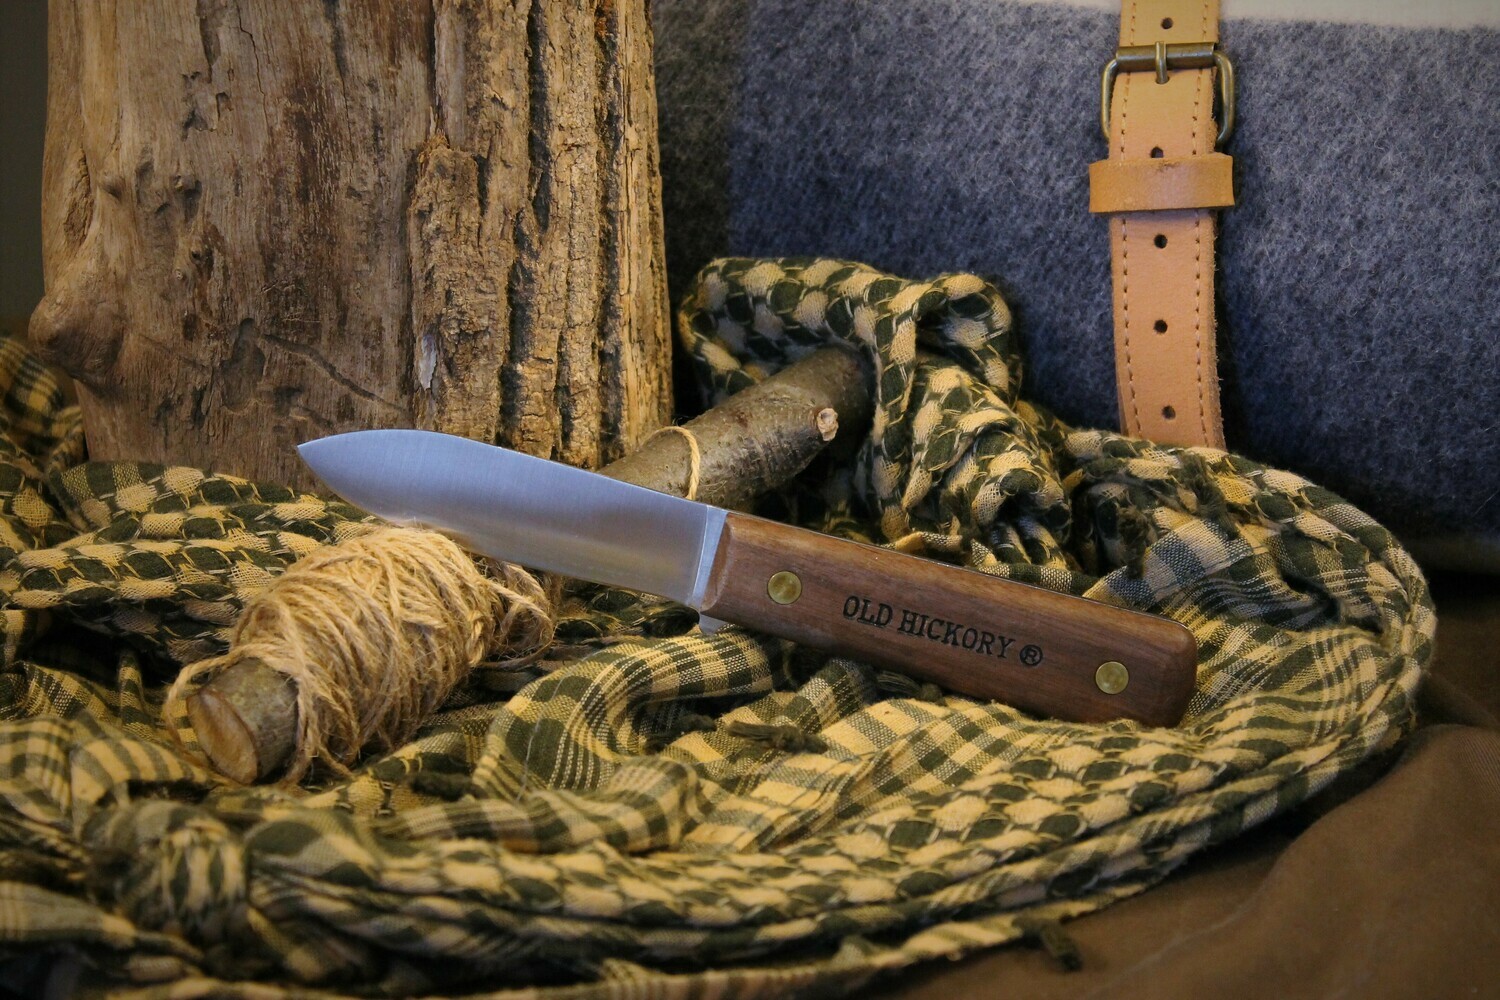 Old Hickory Fish & Small Game knife